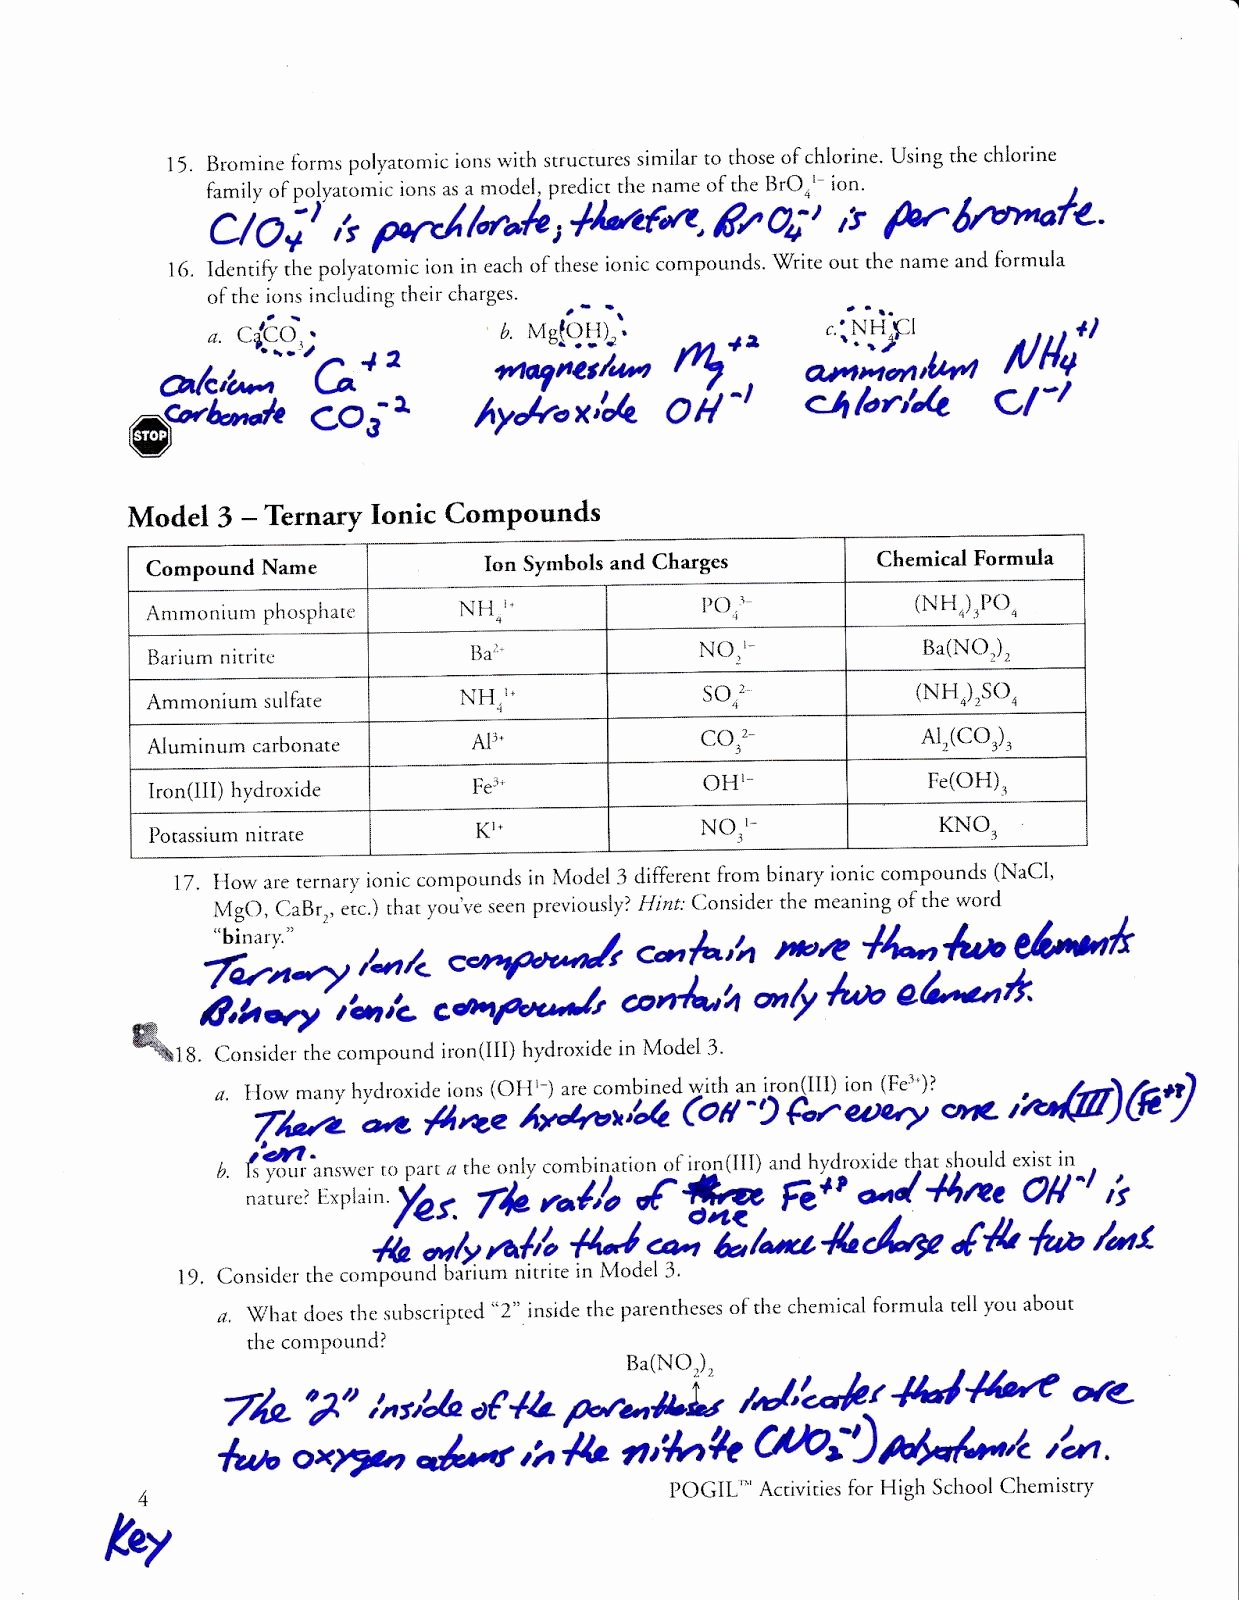 Nuclear Chemistry Worksheet Answers Awesome Nuclear Chemistry Worksheet K Answer Key